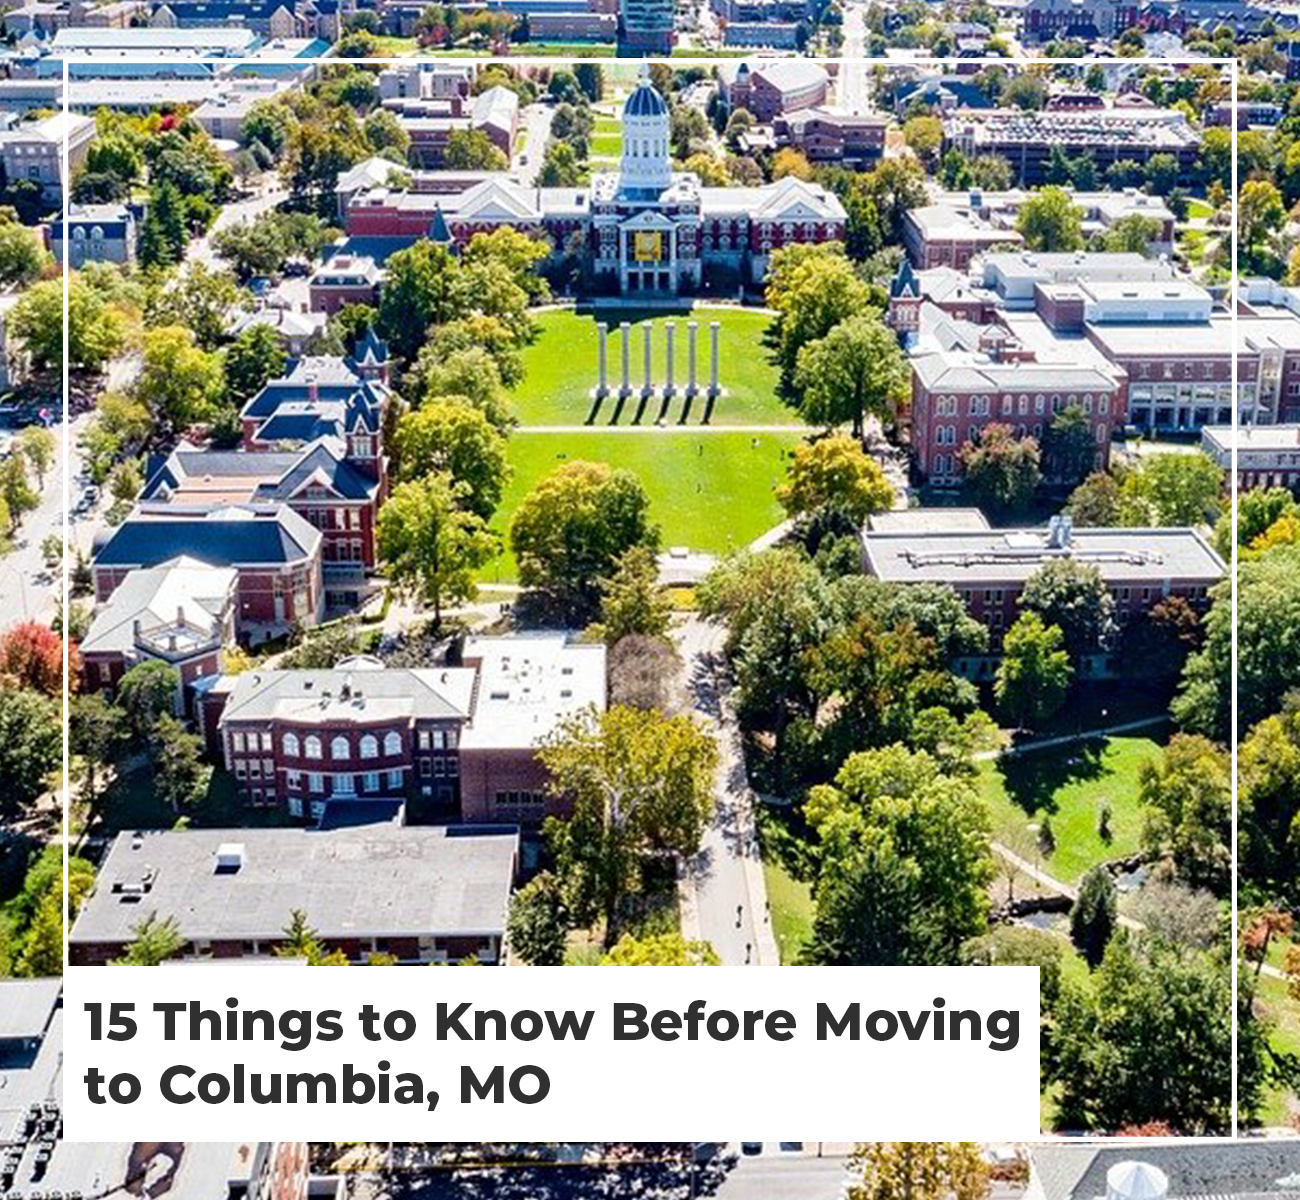 15 Things to Know Before Moving To Columbia, MO